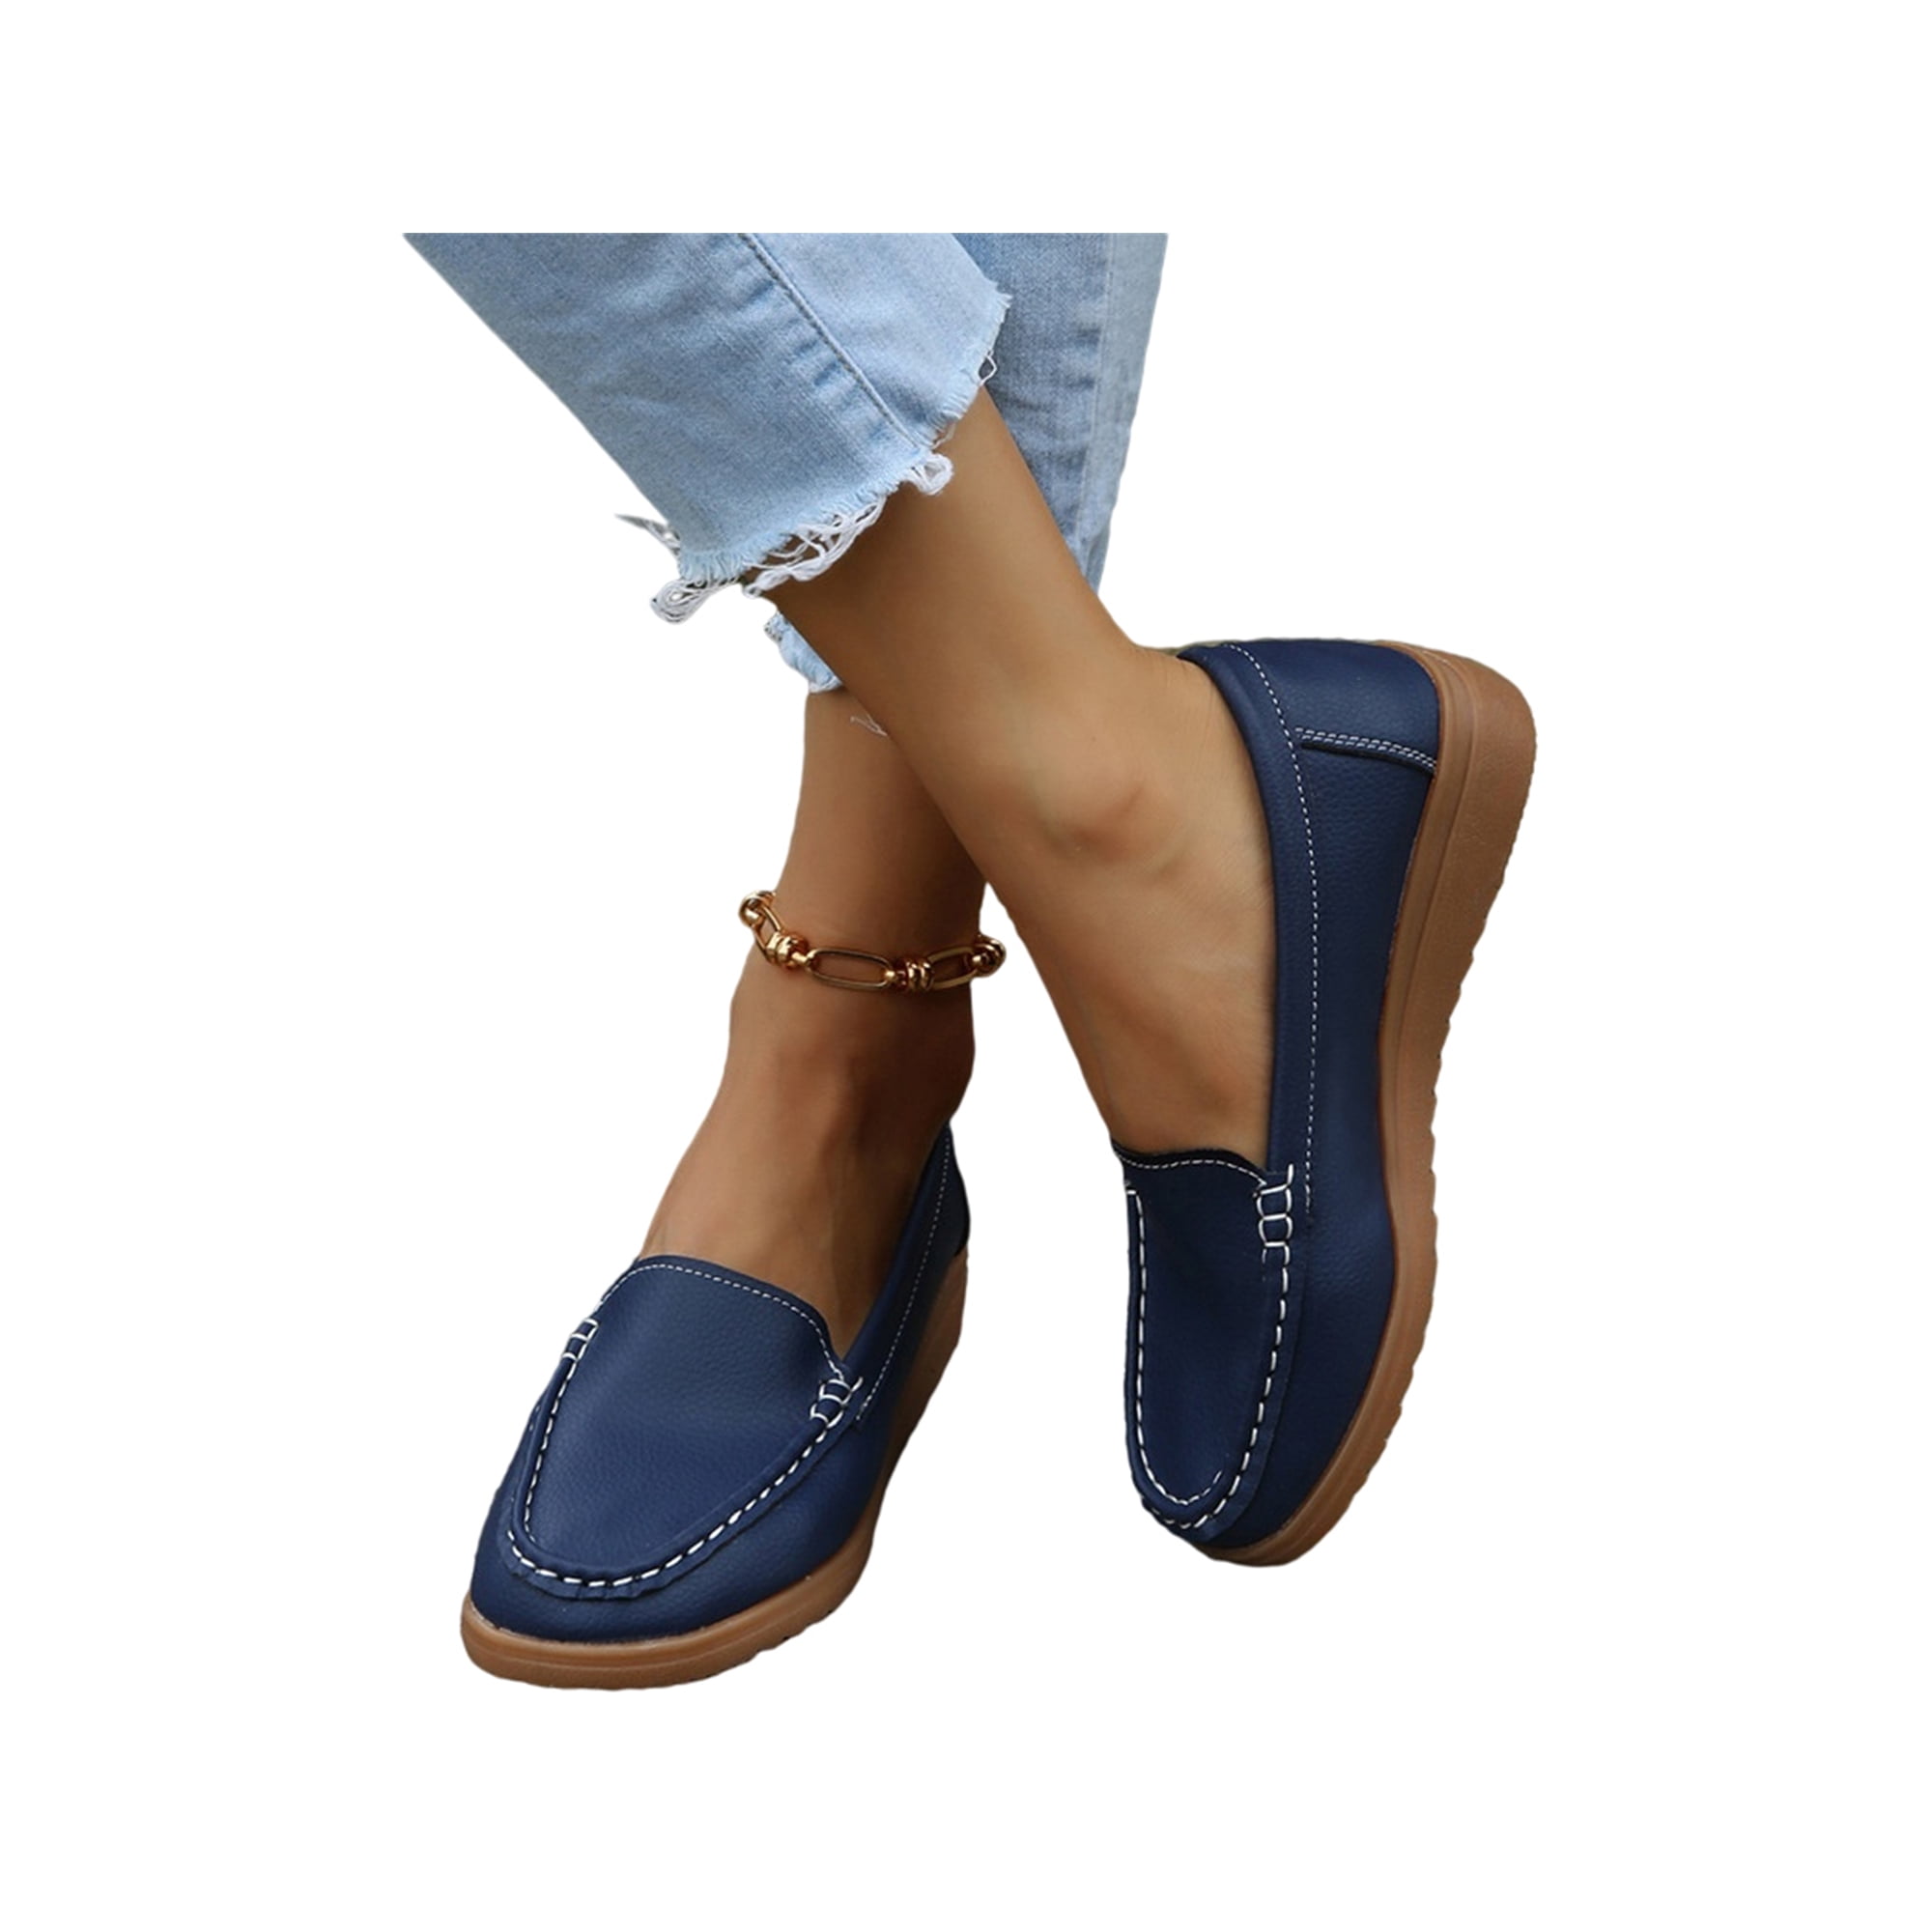 Women's Classic Penny Loafers Driving Moccasins Slip Boat Shoes Fashion Flats Summer Size 4.5-8.5 Blue 7.5 - Walmart.com